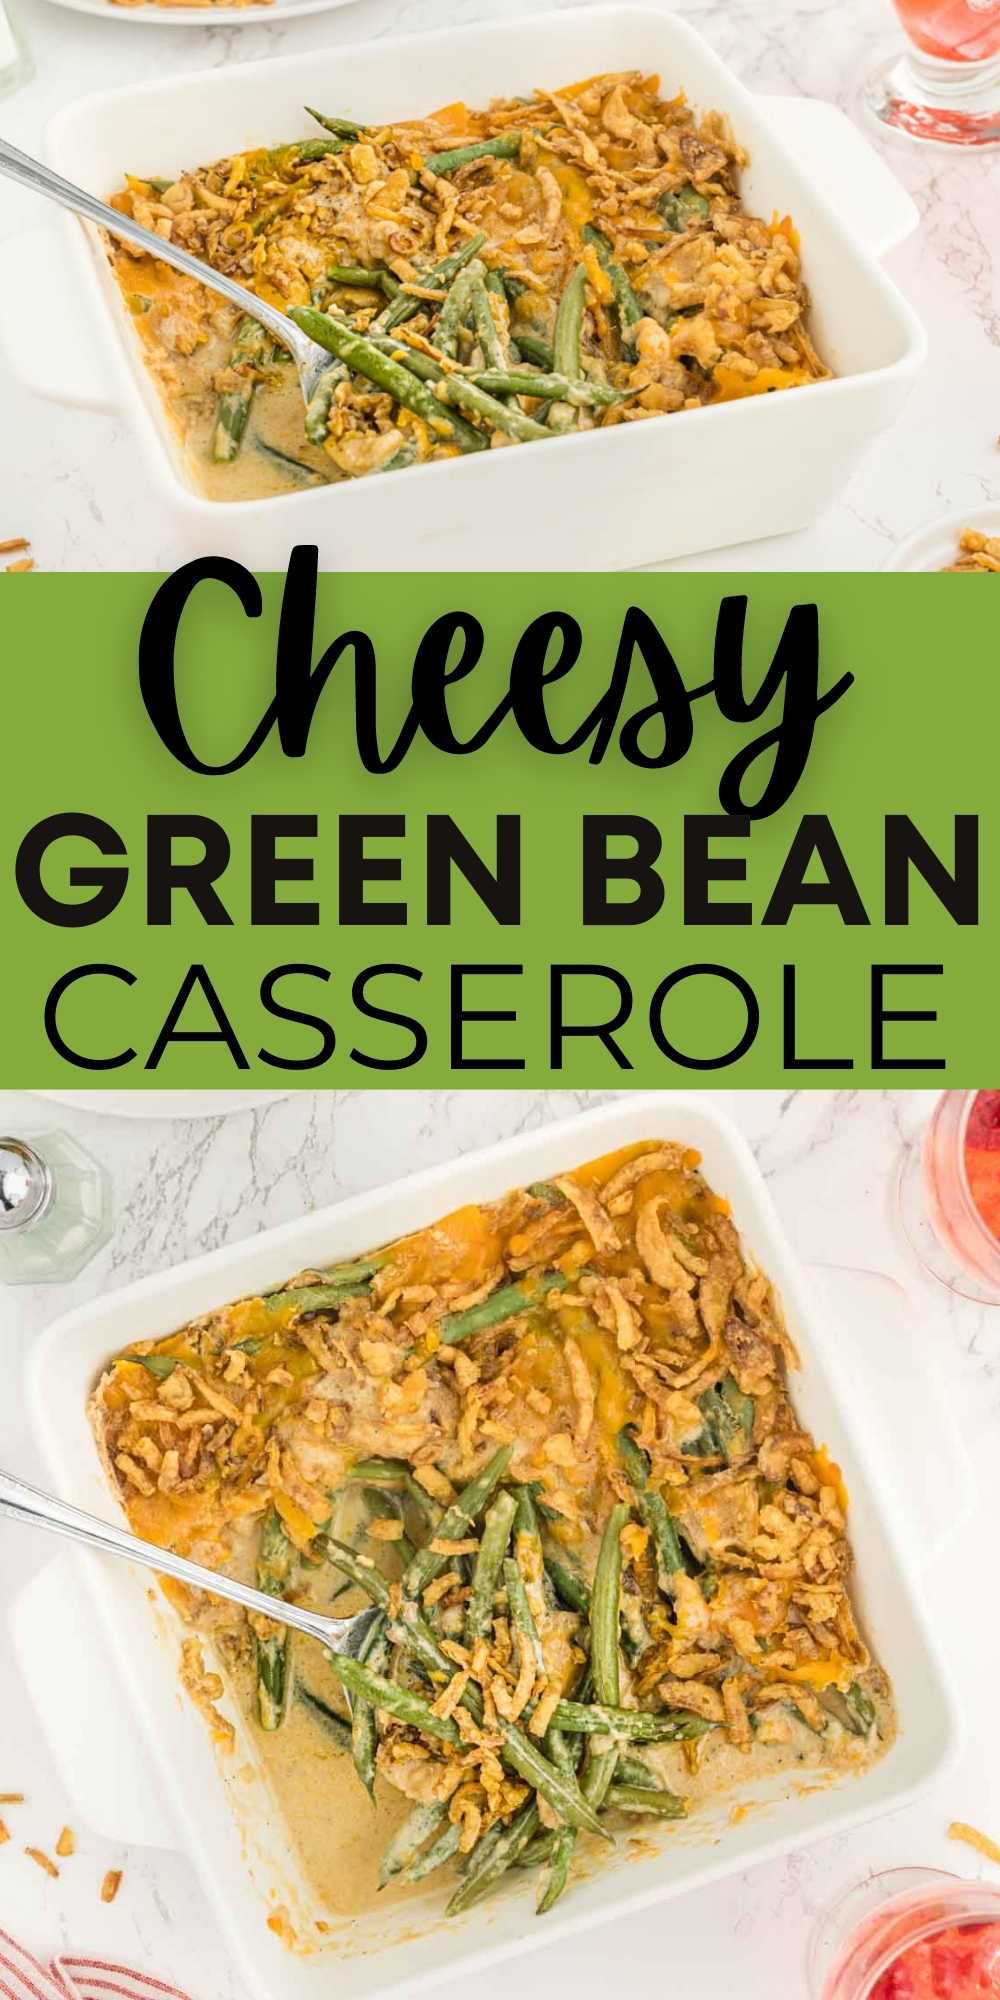 Make Cheesy Green Bean Casserole for an easy side dish to your holiday table. Add cheese to your classic recipe for amazing flavor. This casserole recipe is made with easy ingredients. #eatingonadime #cheesycasserole #greenbeancasserole